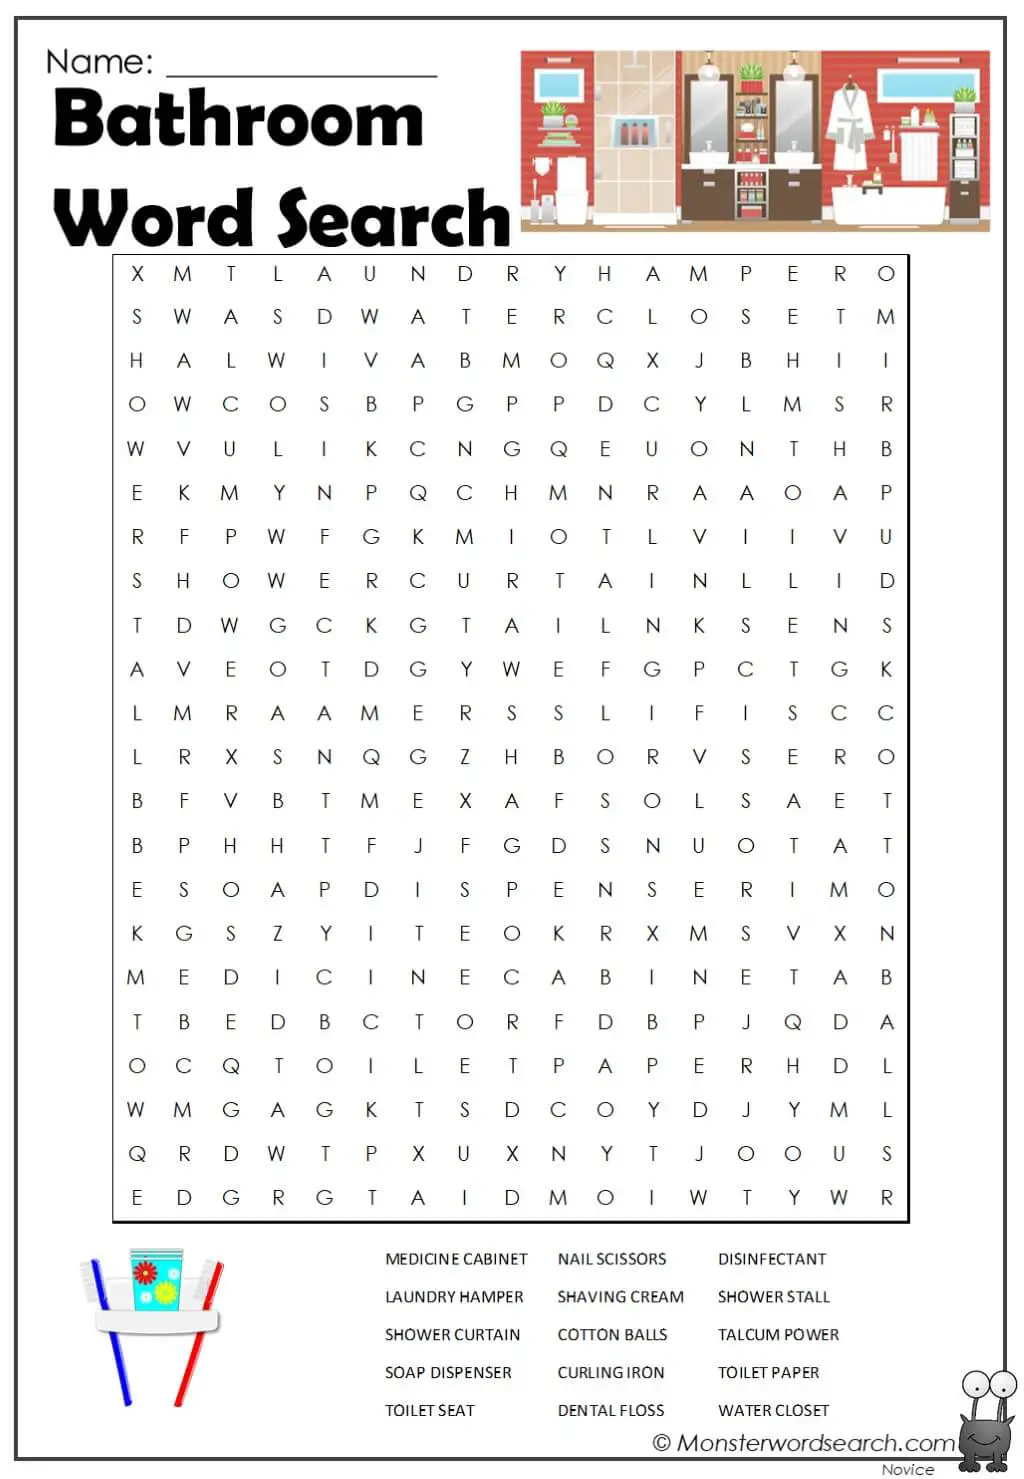 7-cool-bathroom-word-searches-kitty-baby-love